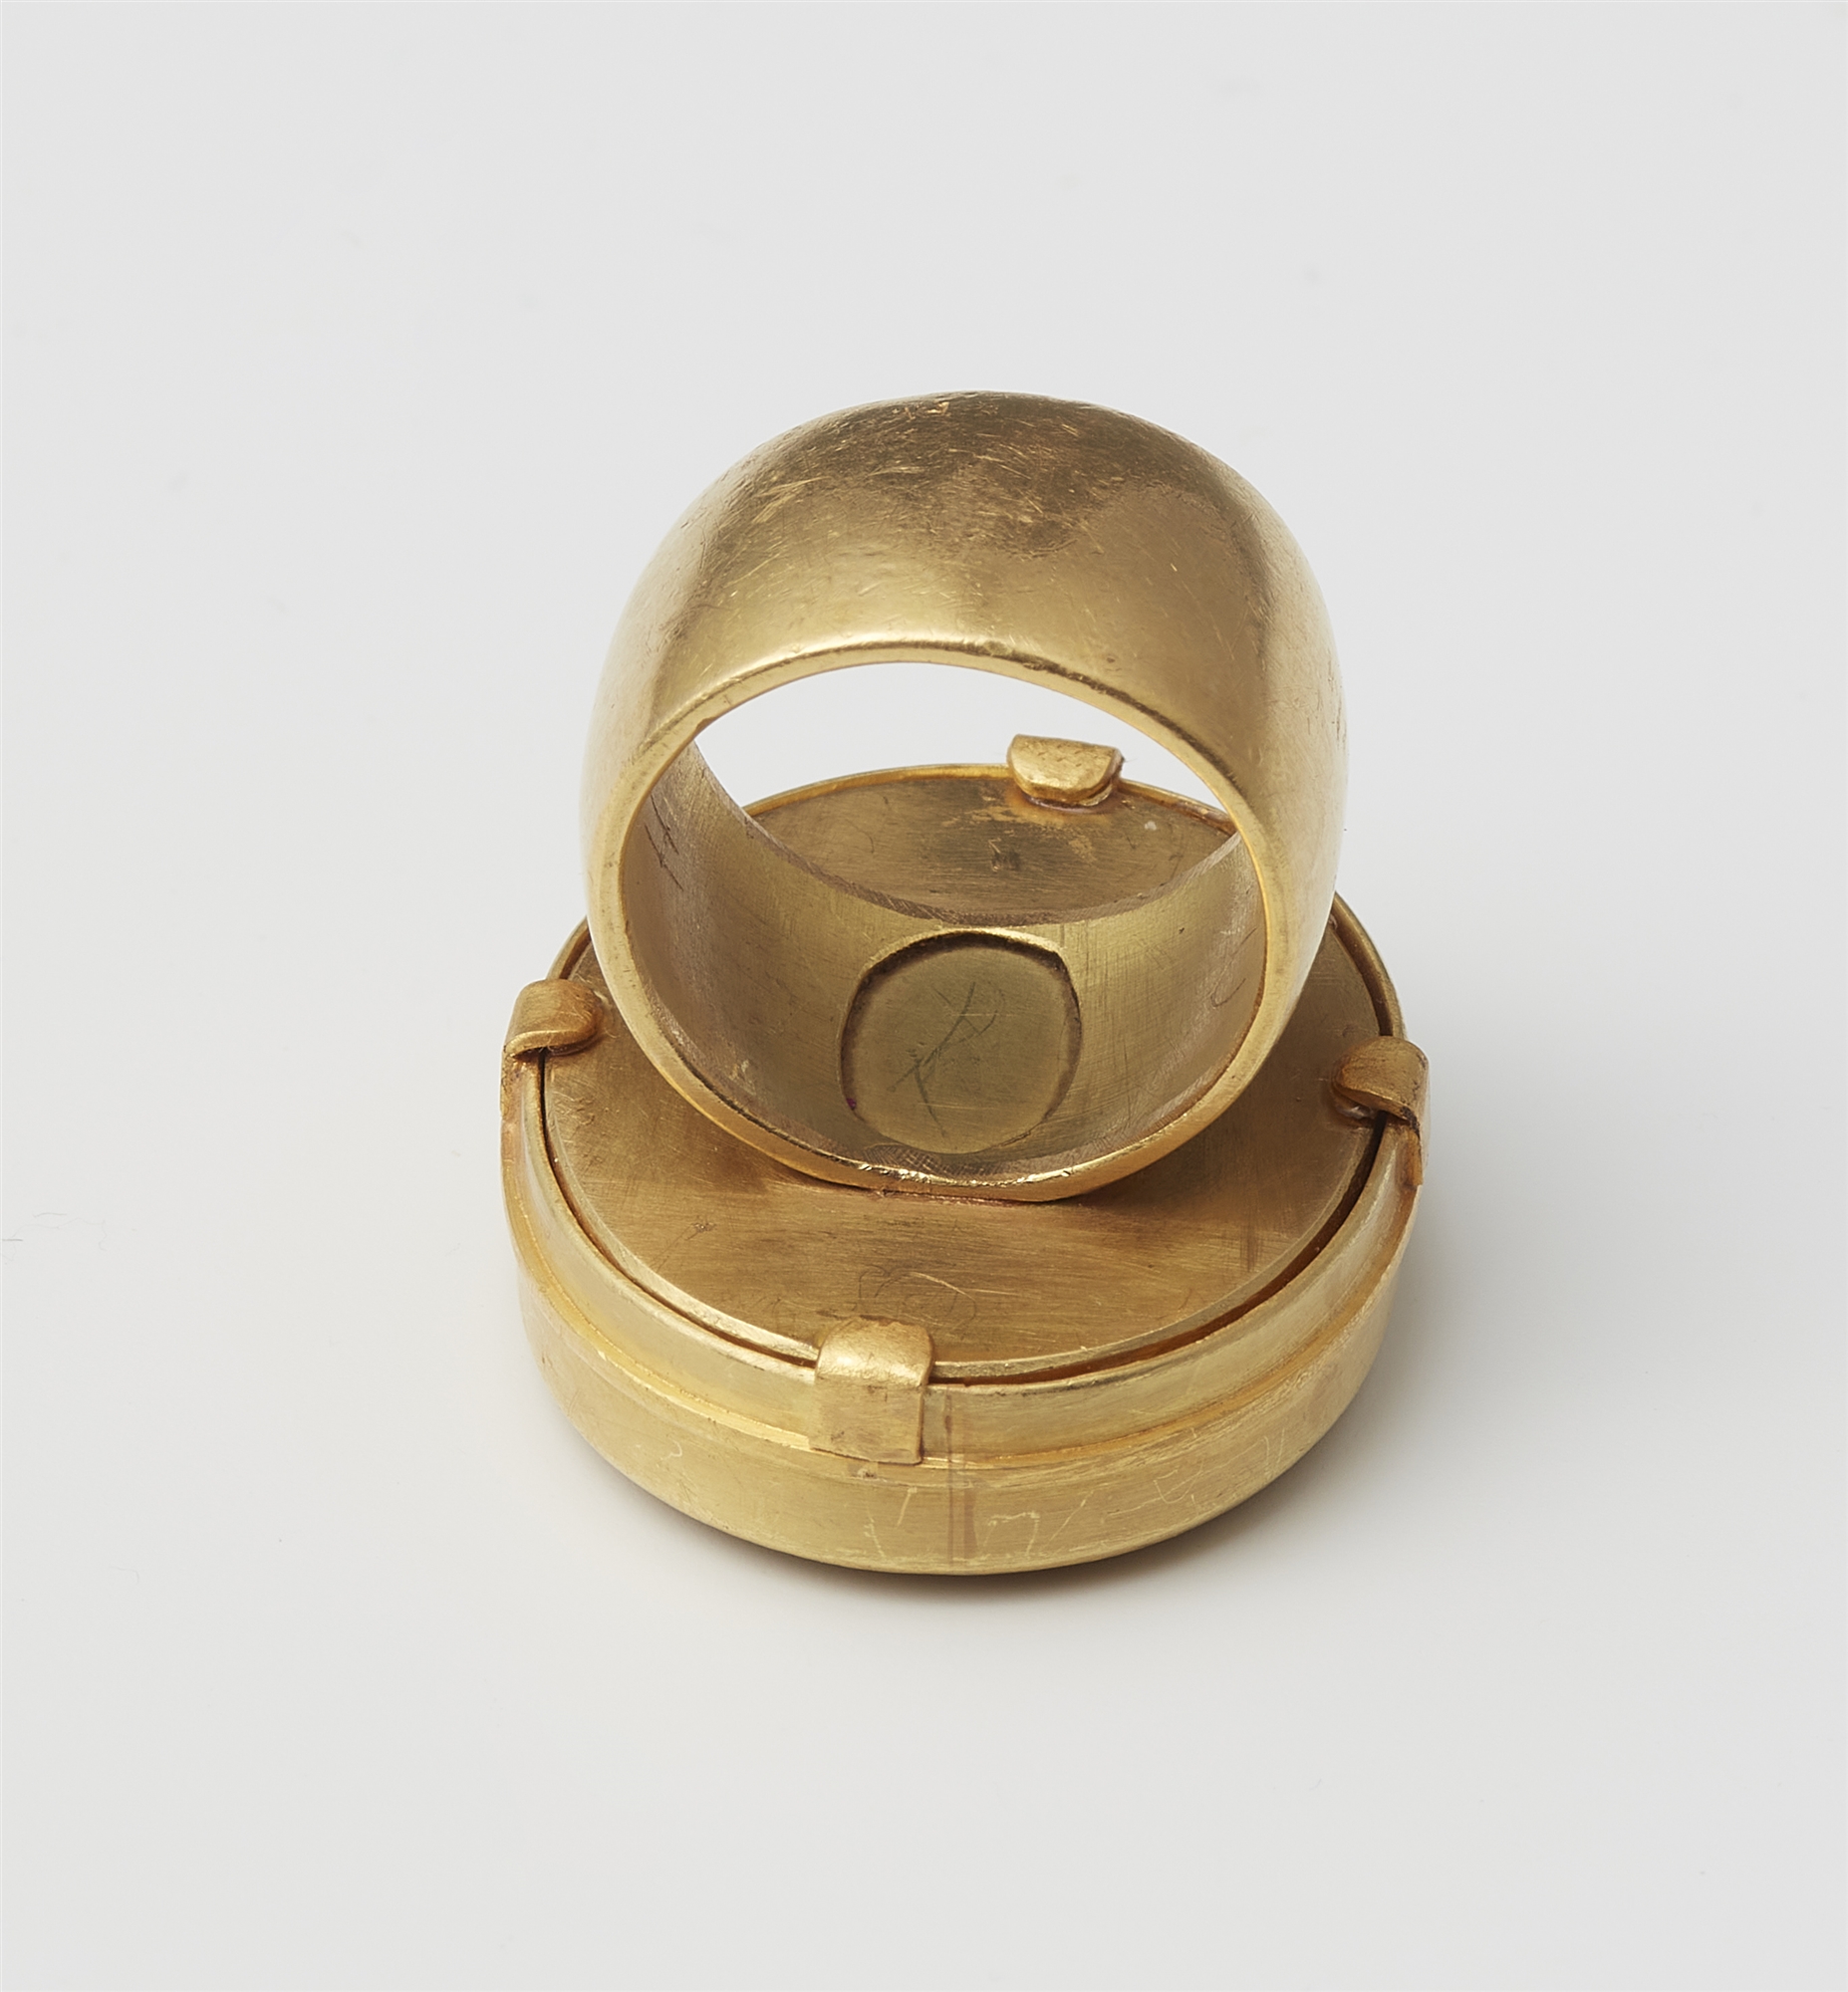 A German 18k gold and rock crystal kinetic "water" ring with capsule bezel including a porcelain pla - Image 3 of 3